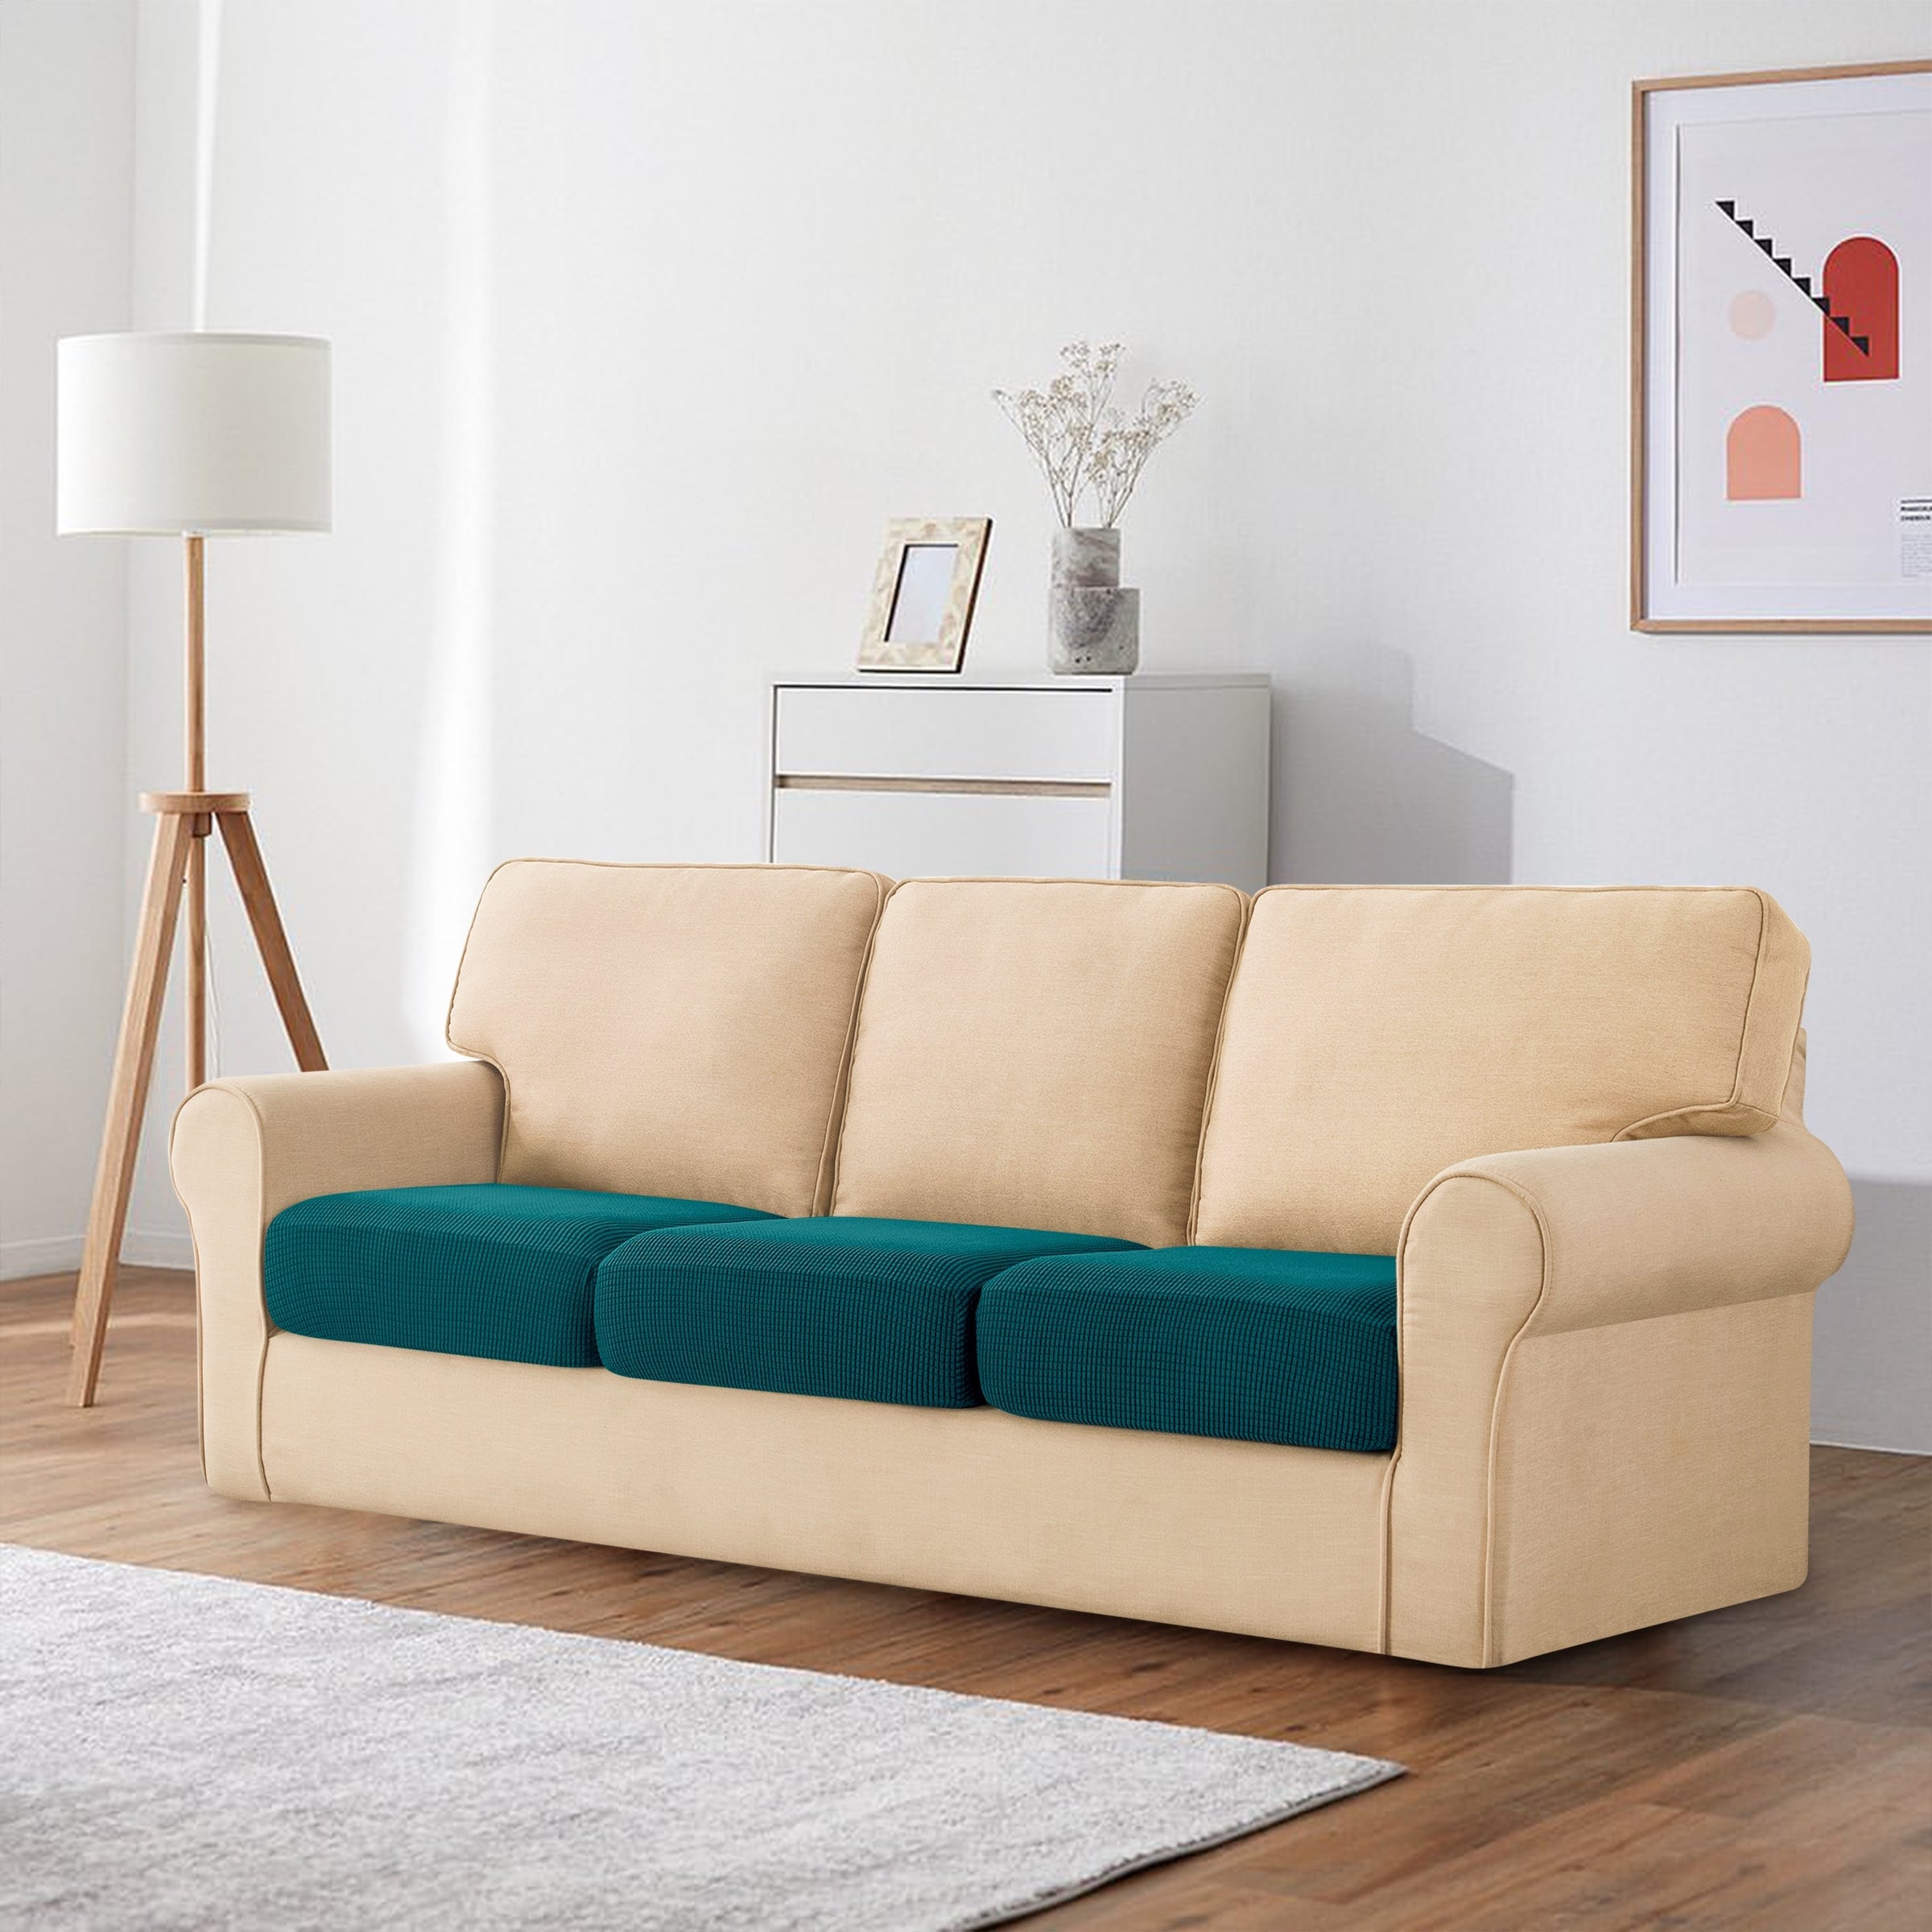 https://ak1.ostkcdn.com/images/products/is/images/direct/56222cb0159c73c4fe7ca2dd483d4ee32a726ee6/Subrtex-3-Piece-Stretch-Separate-Sofa-Cushion-Cover-Elastic-Slipcover.jpg